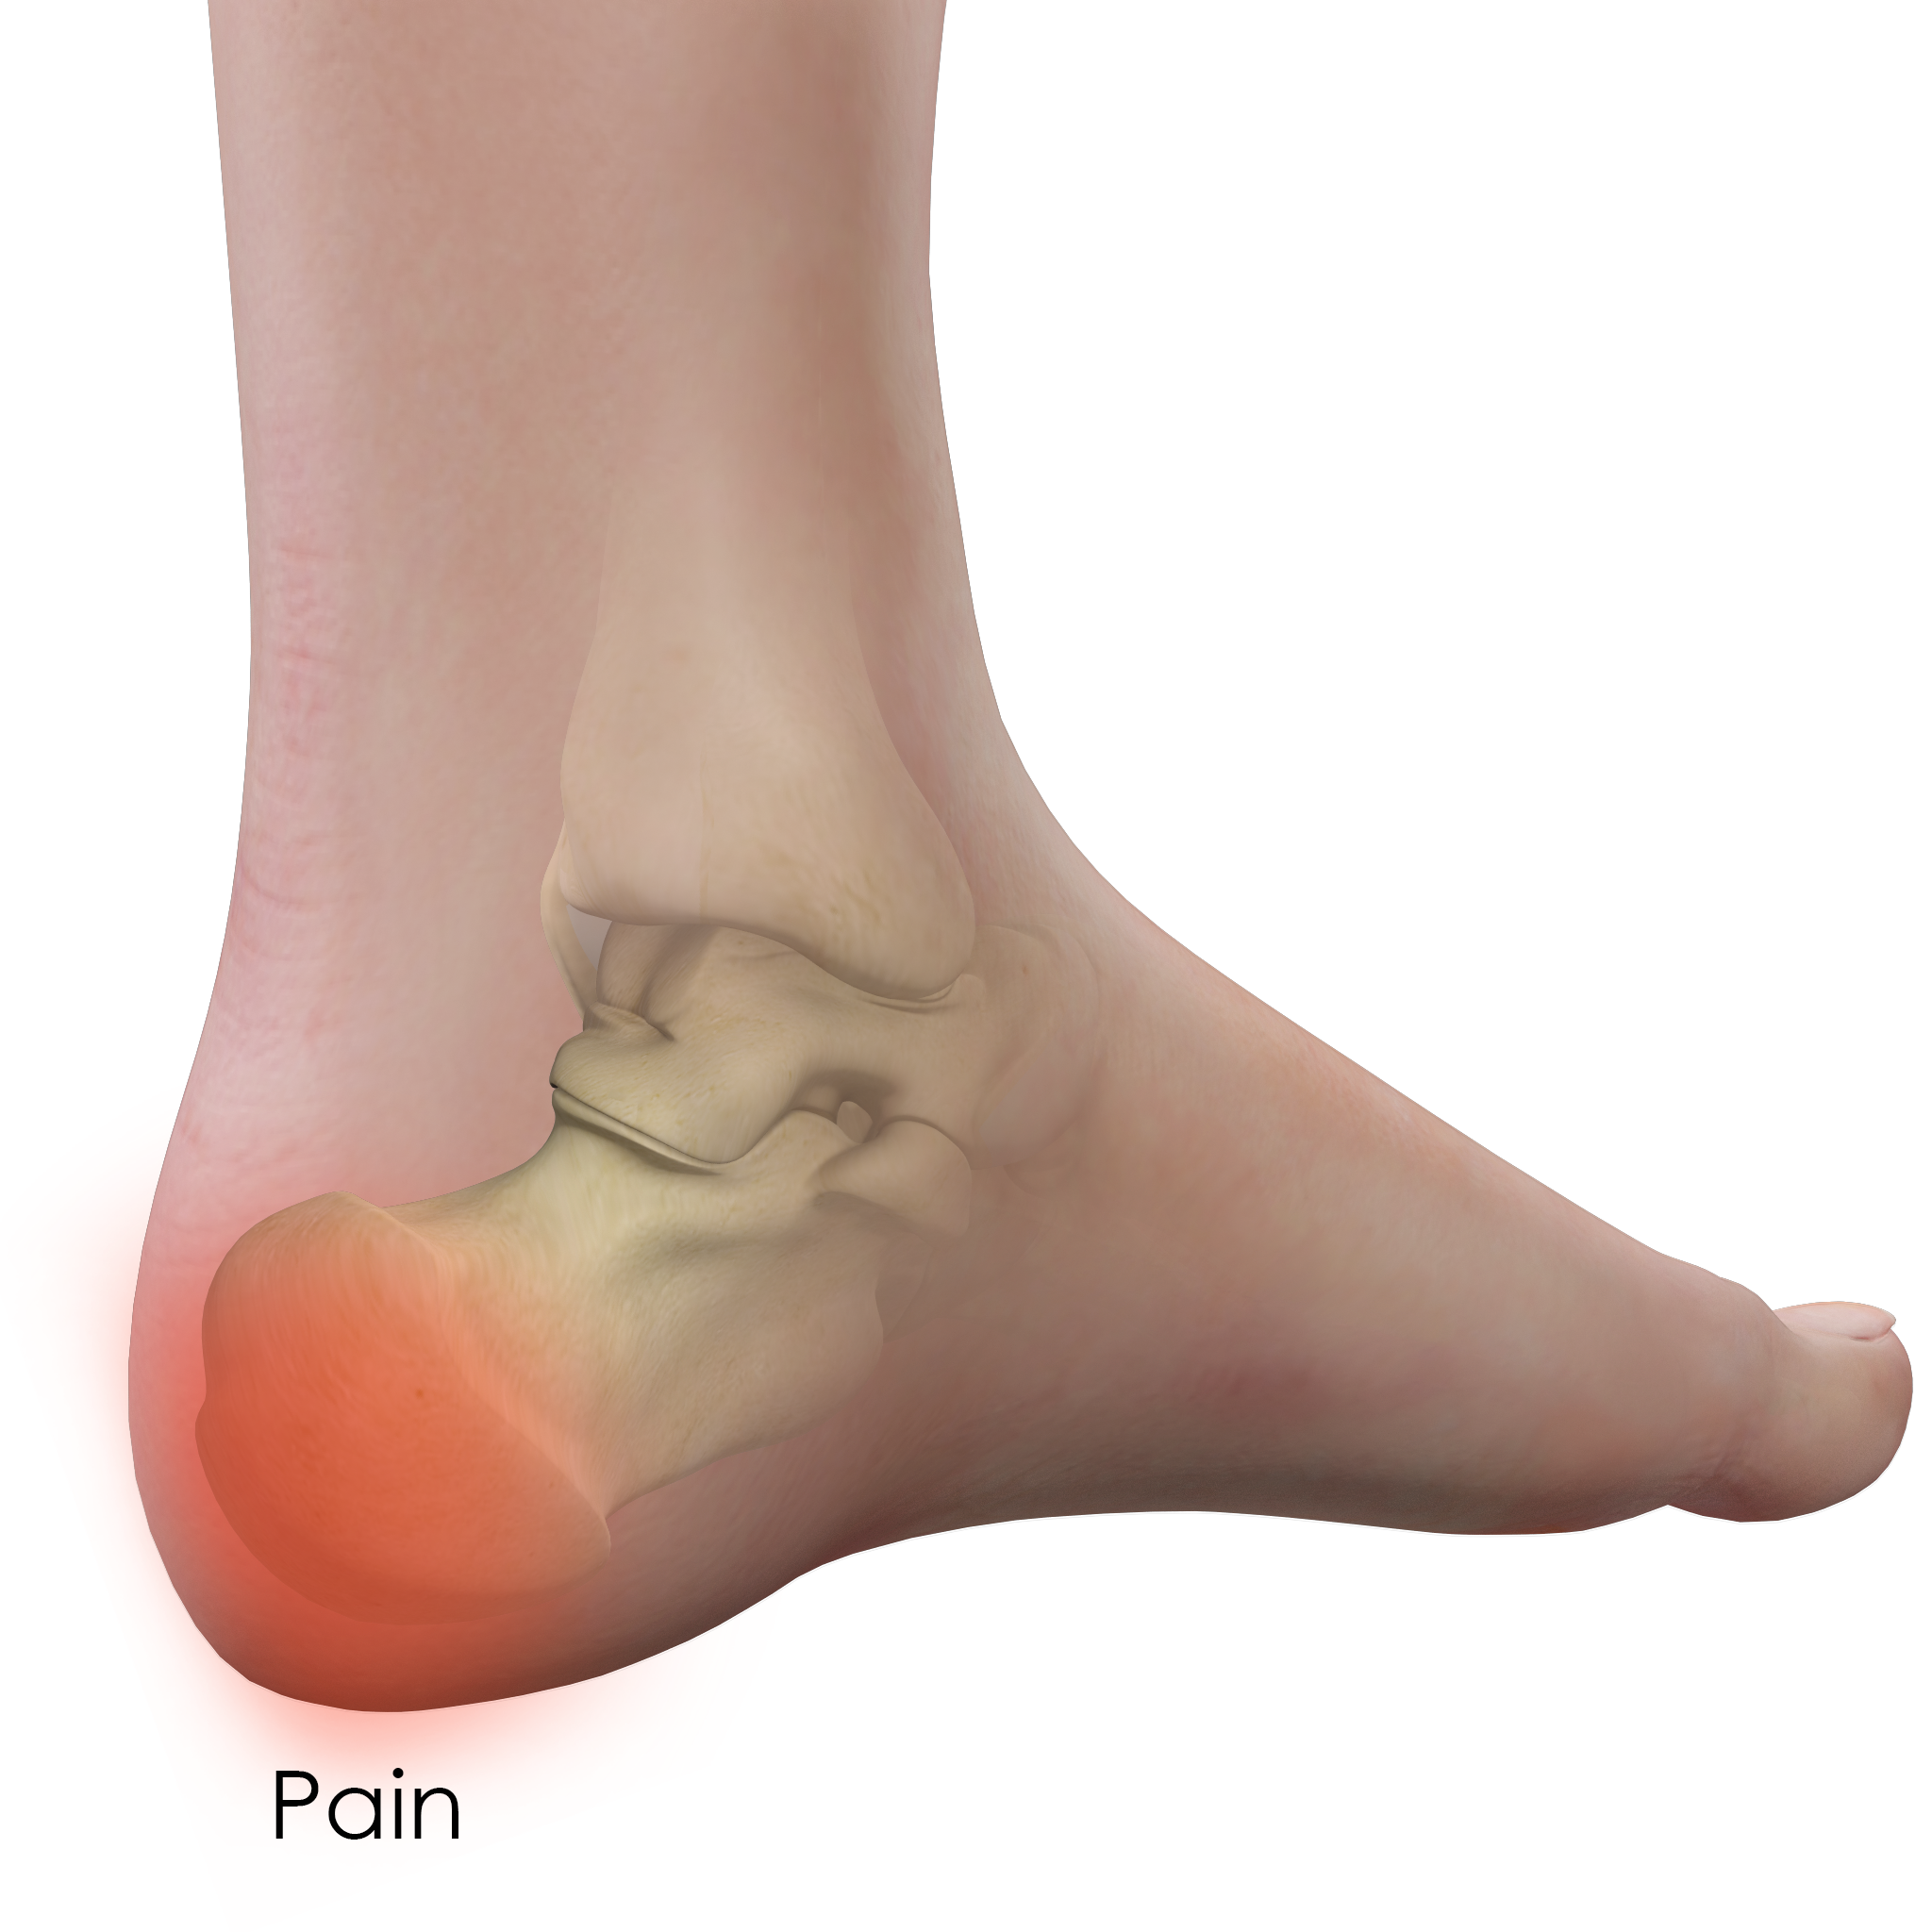 pain in heel and ankle